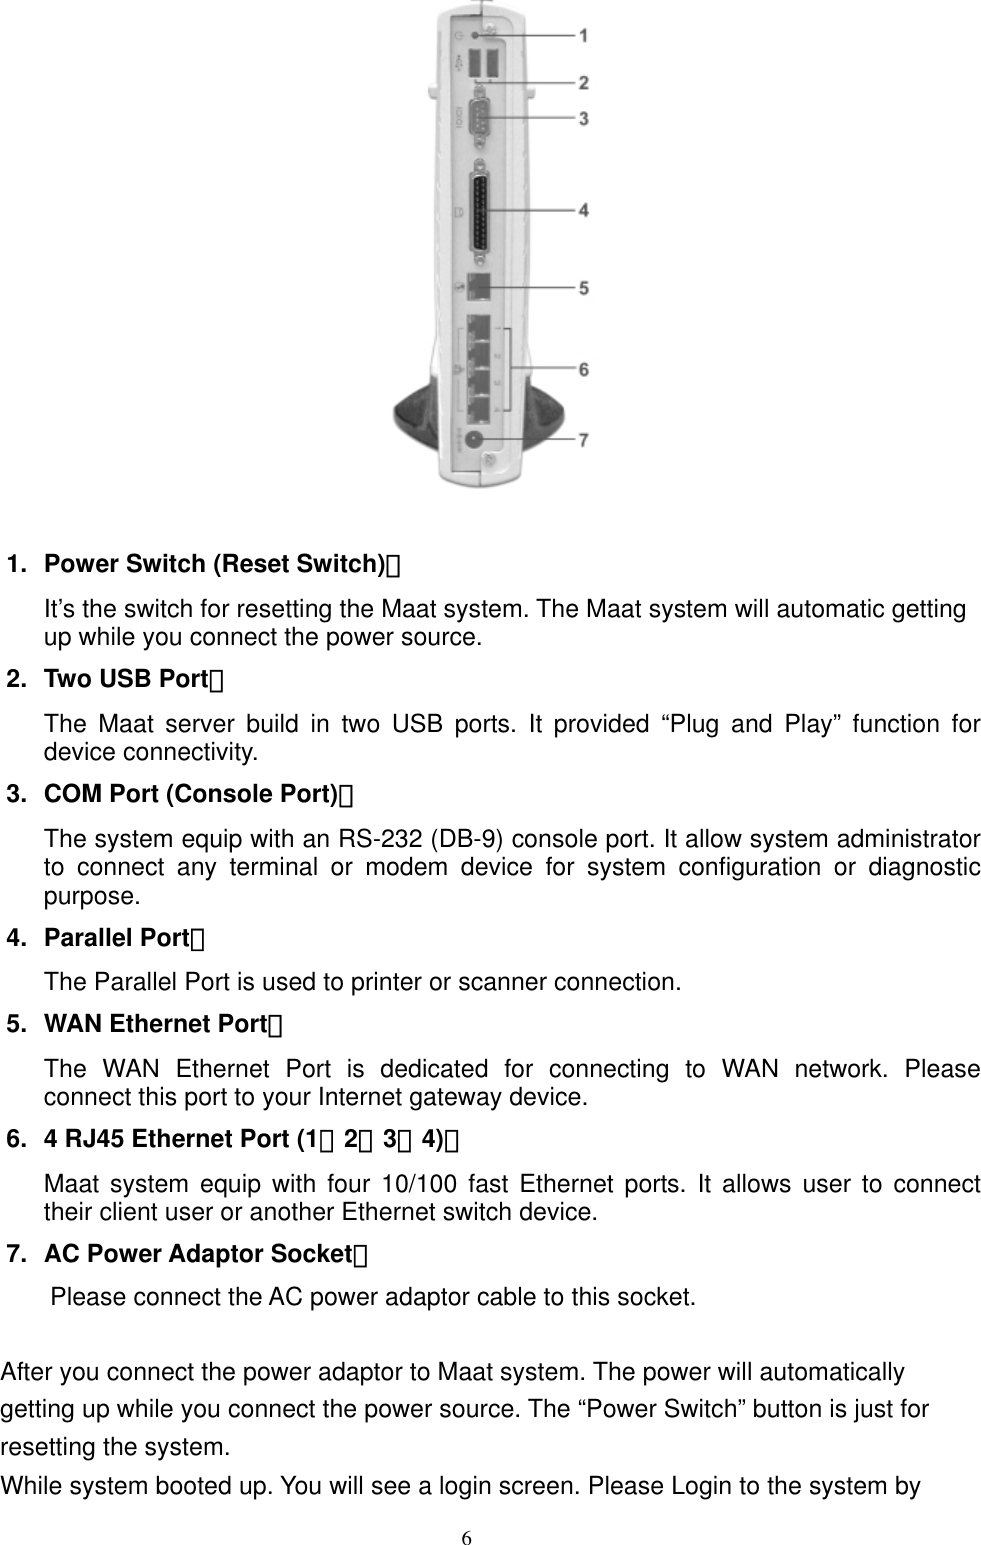  6  1.  Power Switch (Reset Switch)： It’s the switch for resetting the Maat system. The Maat system will automatic getting up while you connect the power source.   2.  Two USB Port： The Maat server build in two USB ports. It provided “Plug and Play” function for device connectivity. 3.  COM Port (Console Port)： The system equip with an RS-232 (DB-9) console port. It allow system administrator to connect any terminal or modem device for system configuration or diagnostic purpose.  4. Parallel Port： The Parallel Port is used to printer or scanner connection. 5.  WAN Ethernet Port： The WAN Ethernet Port is dedicated for connecting to WAN network. Please connect this port to your Internet gateway device.   6.  4 RJ45 Ethernet Port (1、2、3、4)： Maat system equip with four 10/100 fast Ethernet ports. It allows user to connect their client user or another Ethernet switch device.   7.  AC Power Adaptor Socket： Please connect the AC power adaptor cable to this socket.  After you connect the power adaptor to Maat system. The power will automatically getting up while you connect the power source. The “Power Switch” button is just for resetting the system.     While system booted up. You will see a login screen. Please Login to the system by 